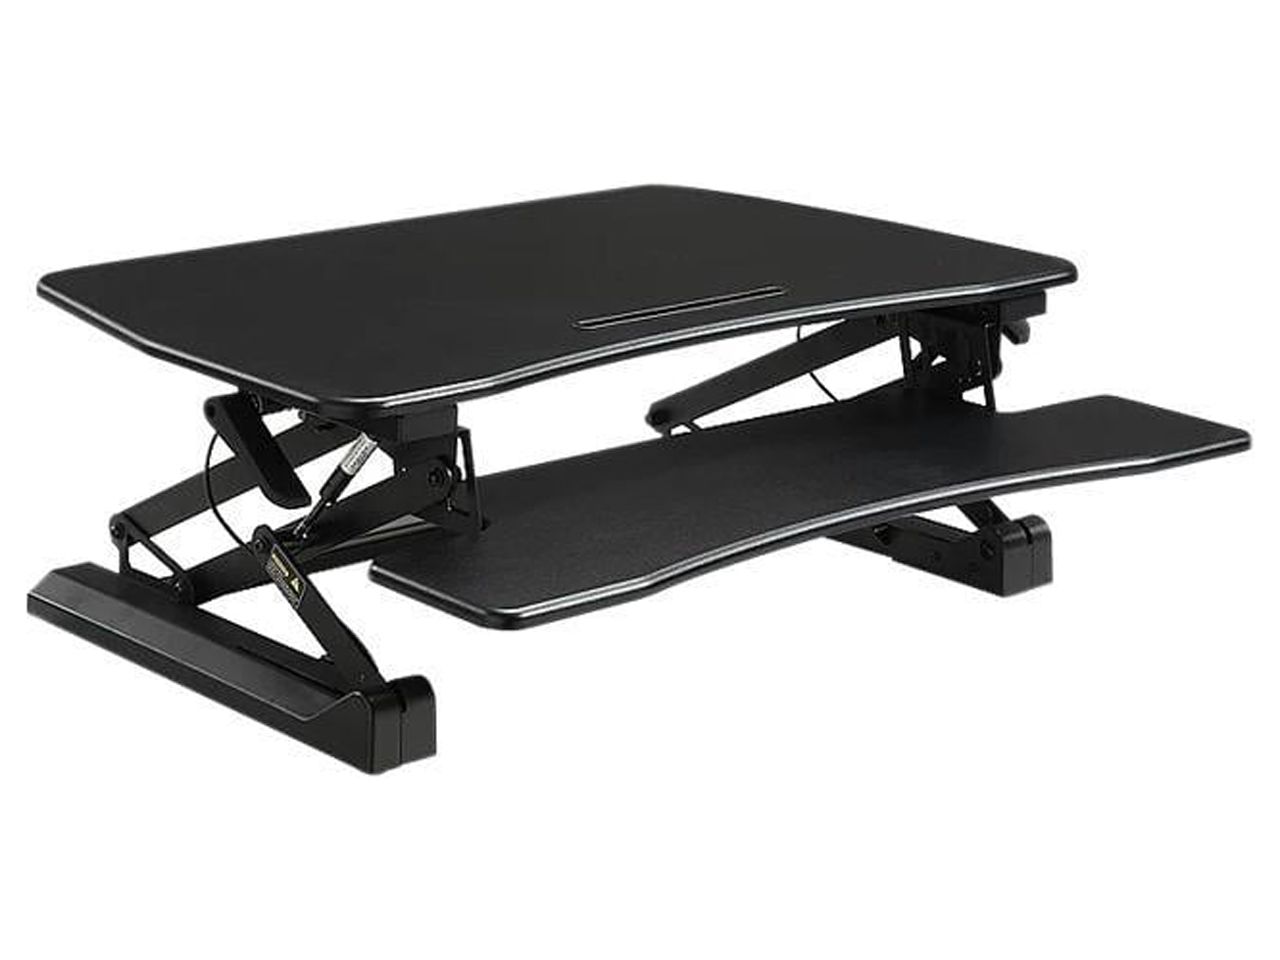 Universal Sit-to-Stand Desk Riser, Gas-Powered, 32", Black - image 1 of 4